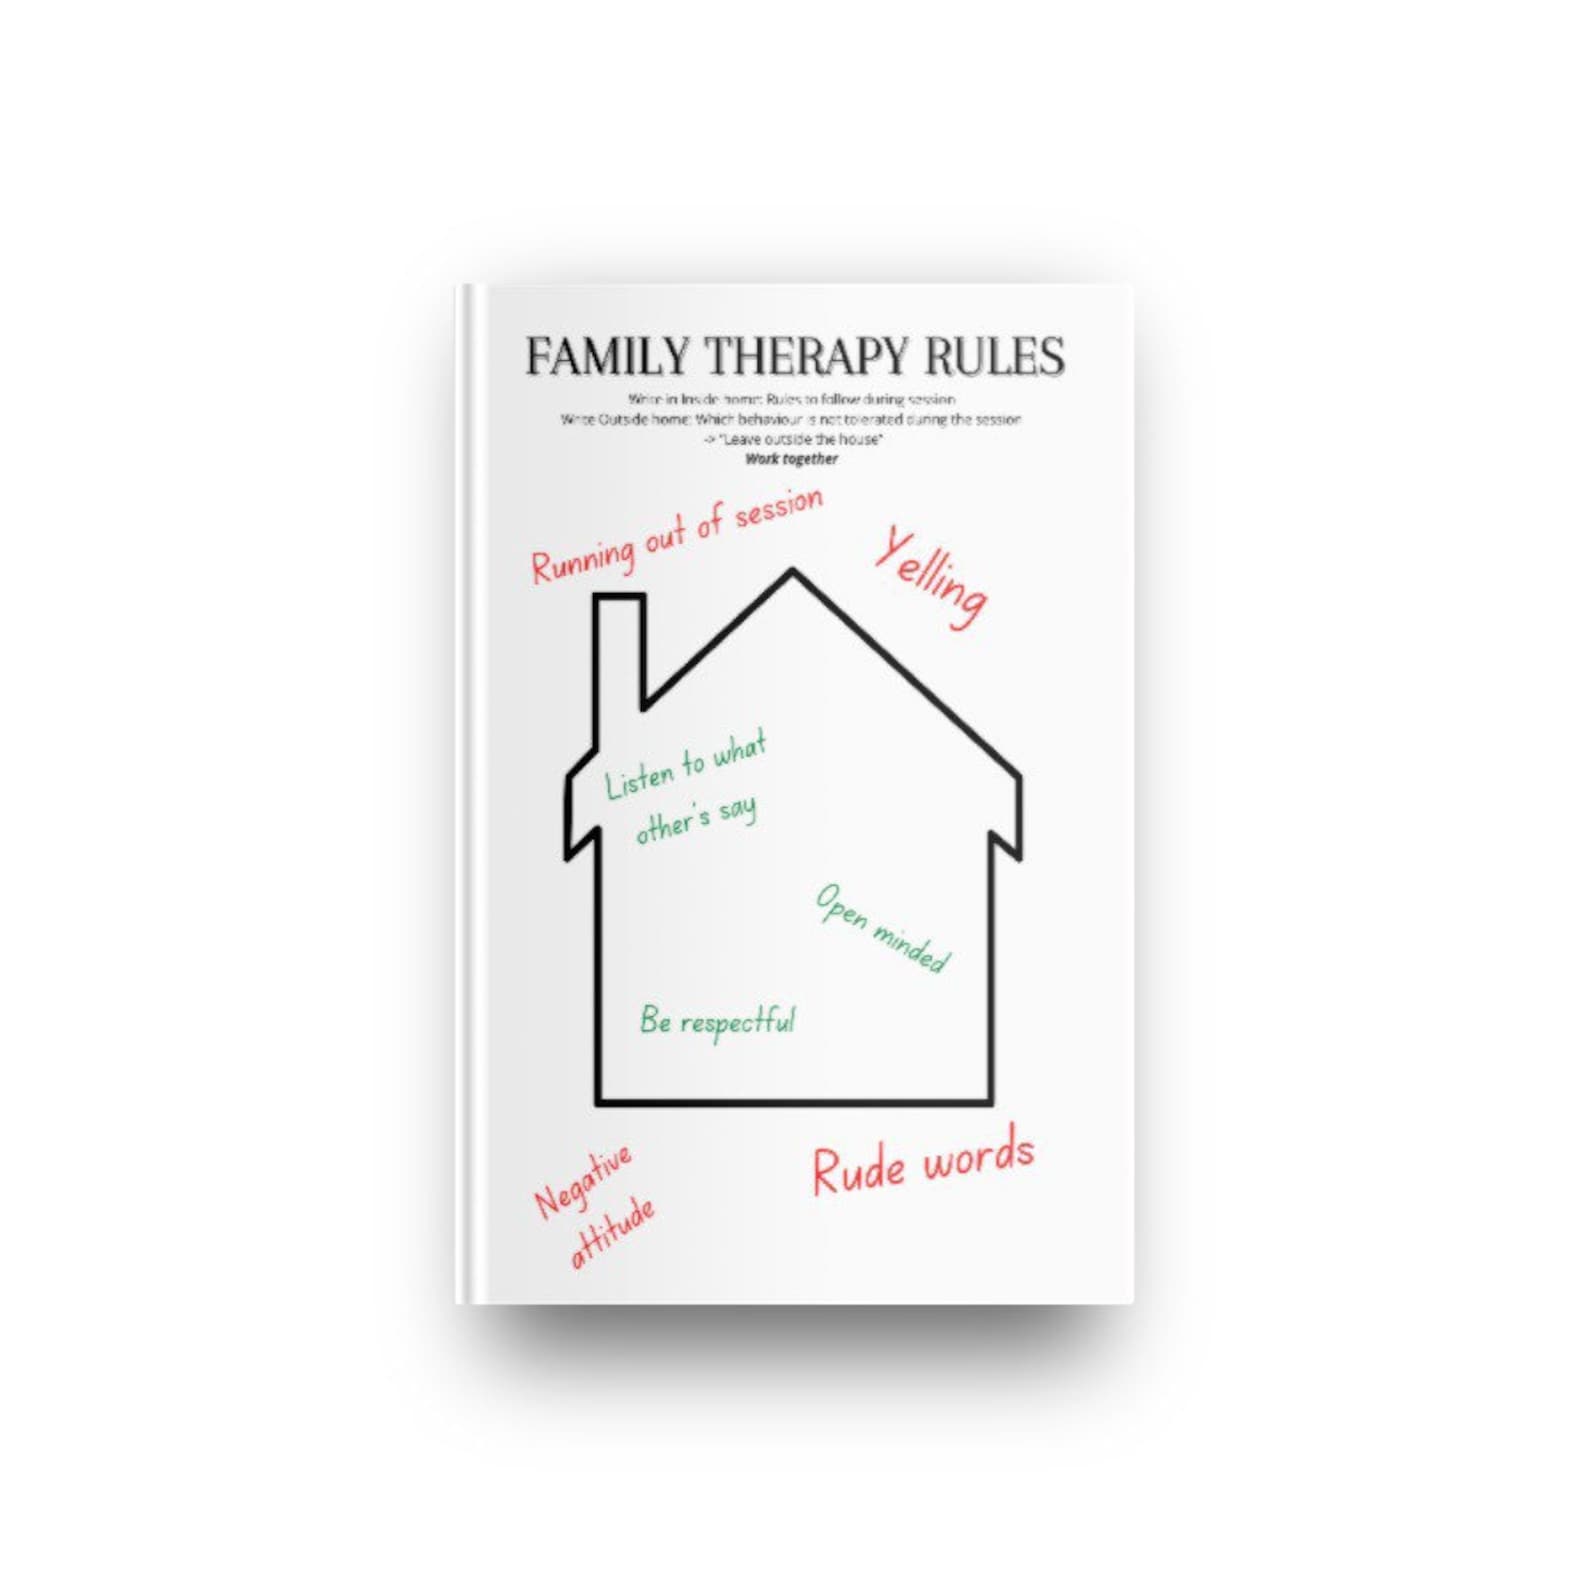 homework assignments for family therapy